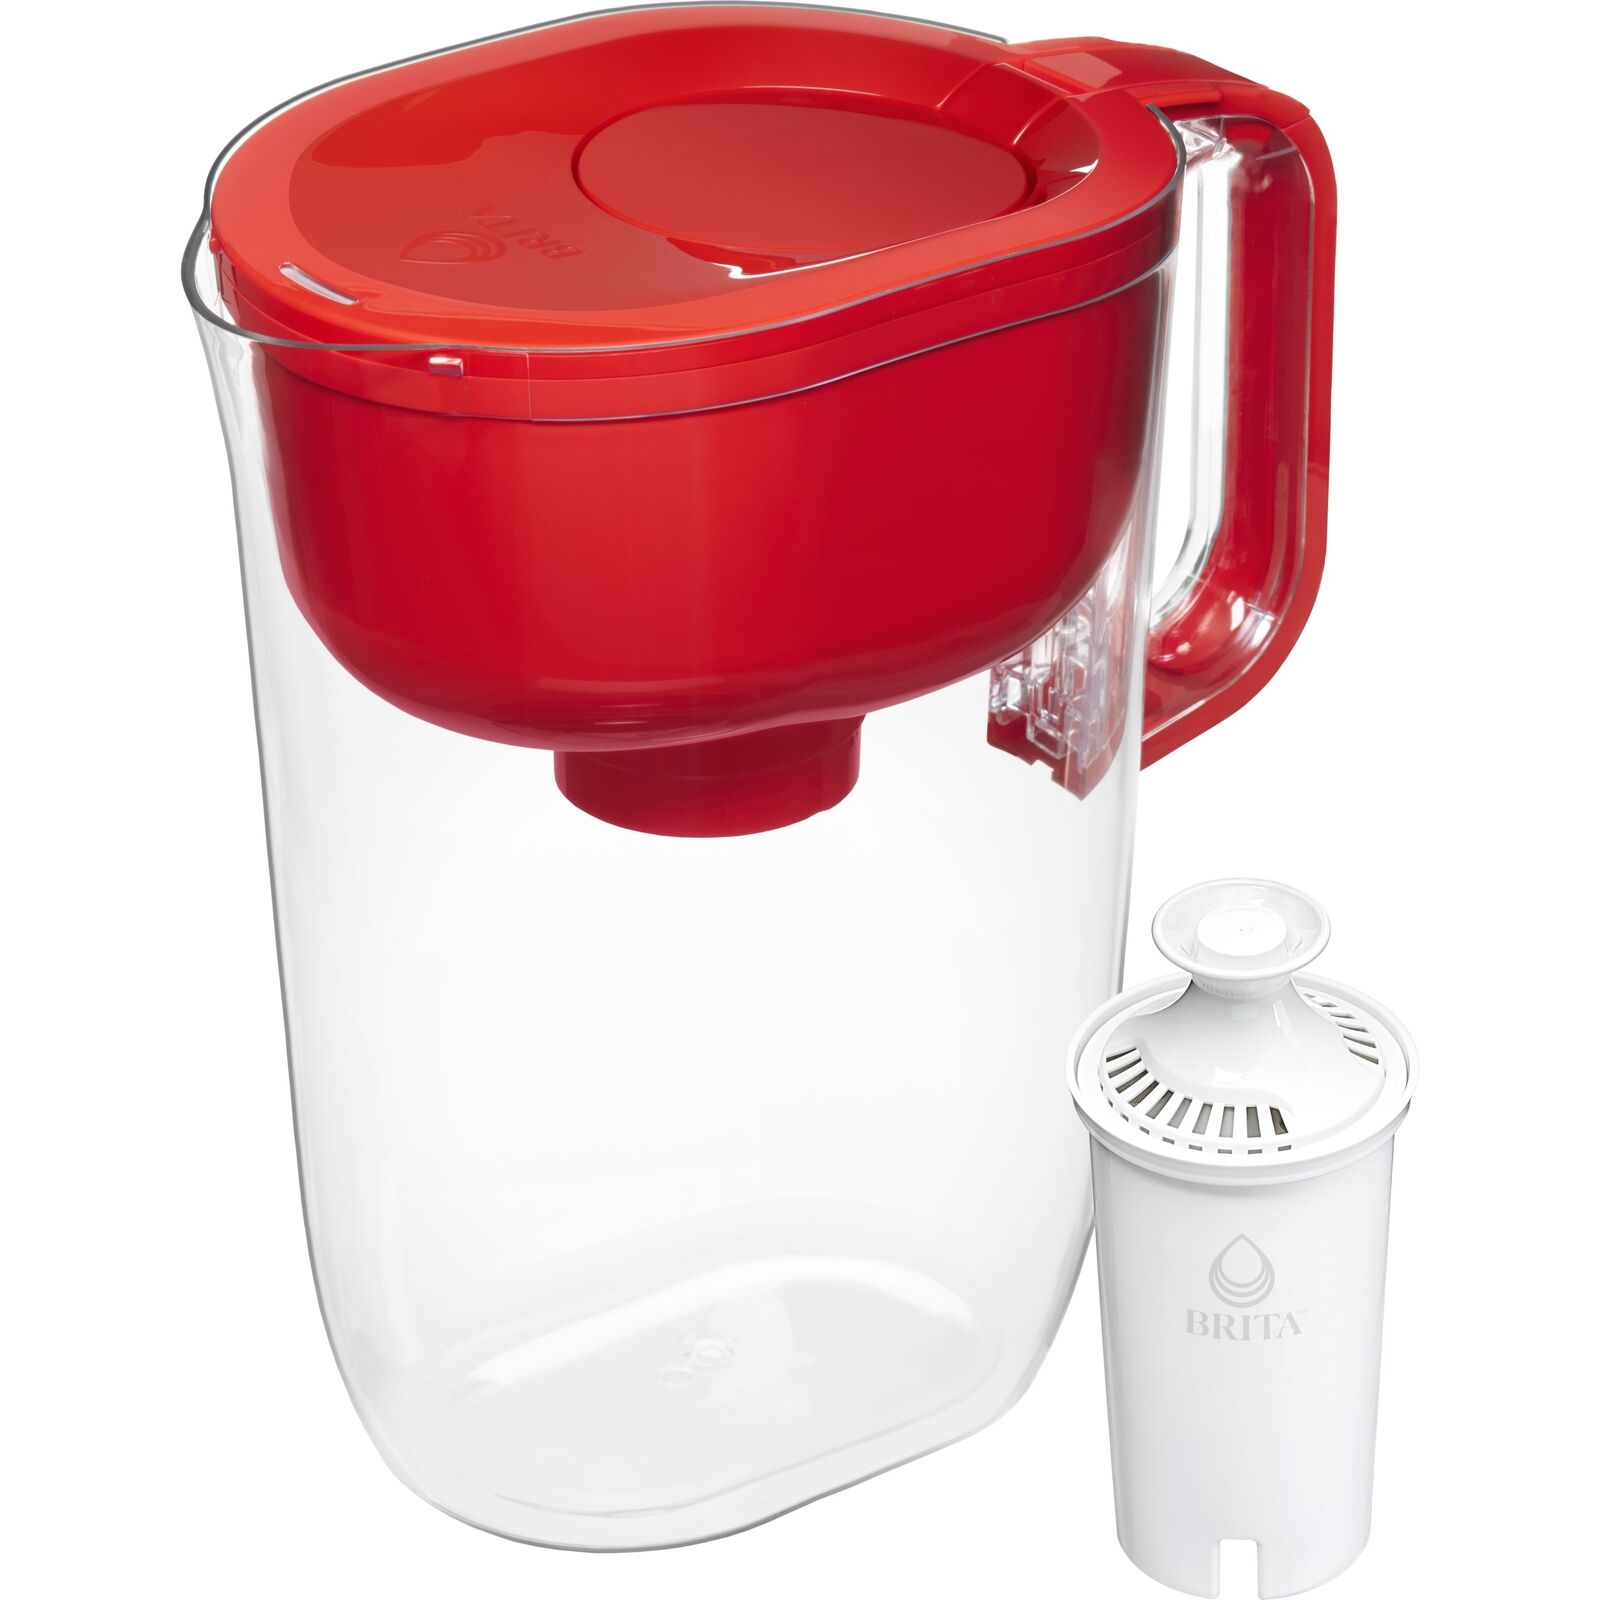 Brita Large 10 Cup Red Huron Water Filter Pitcher with 1 Standard Filter